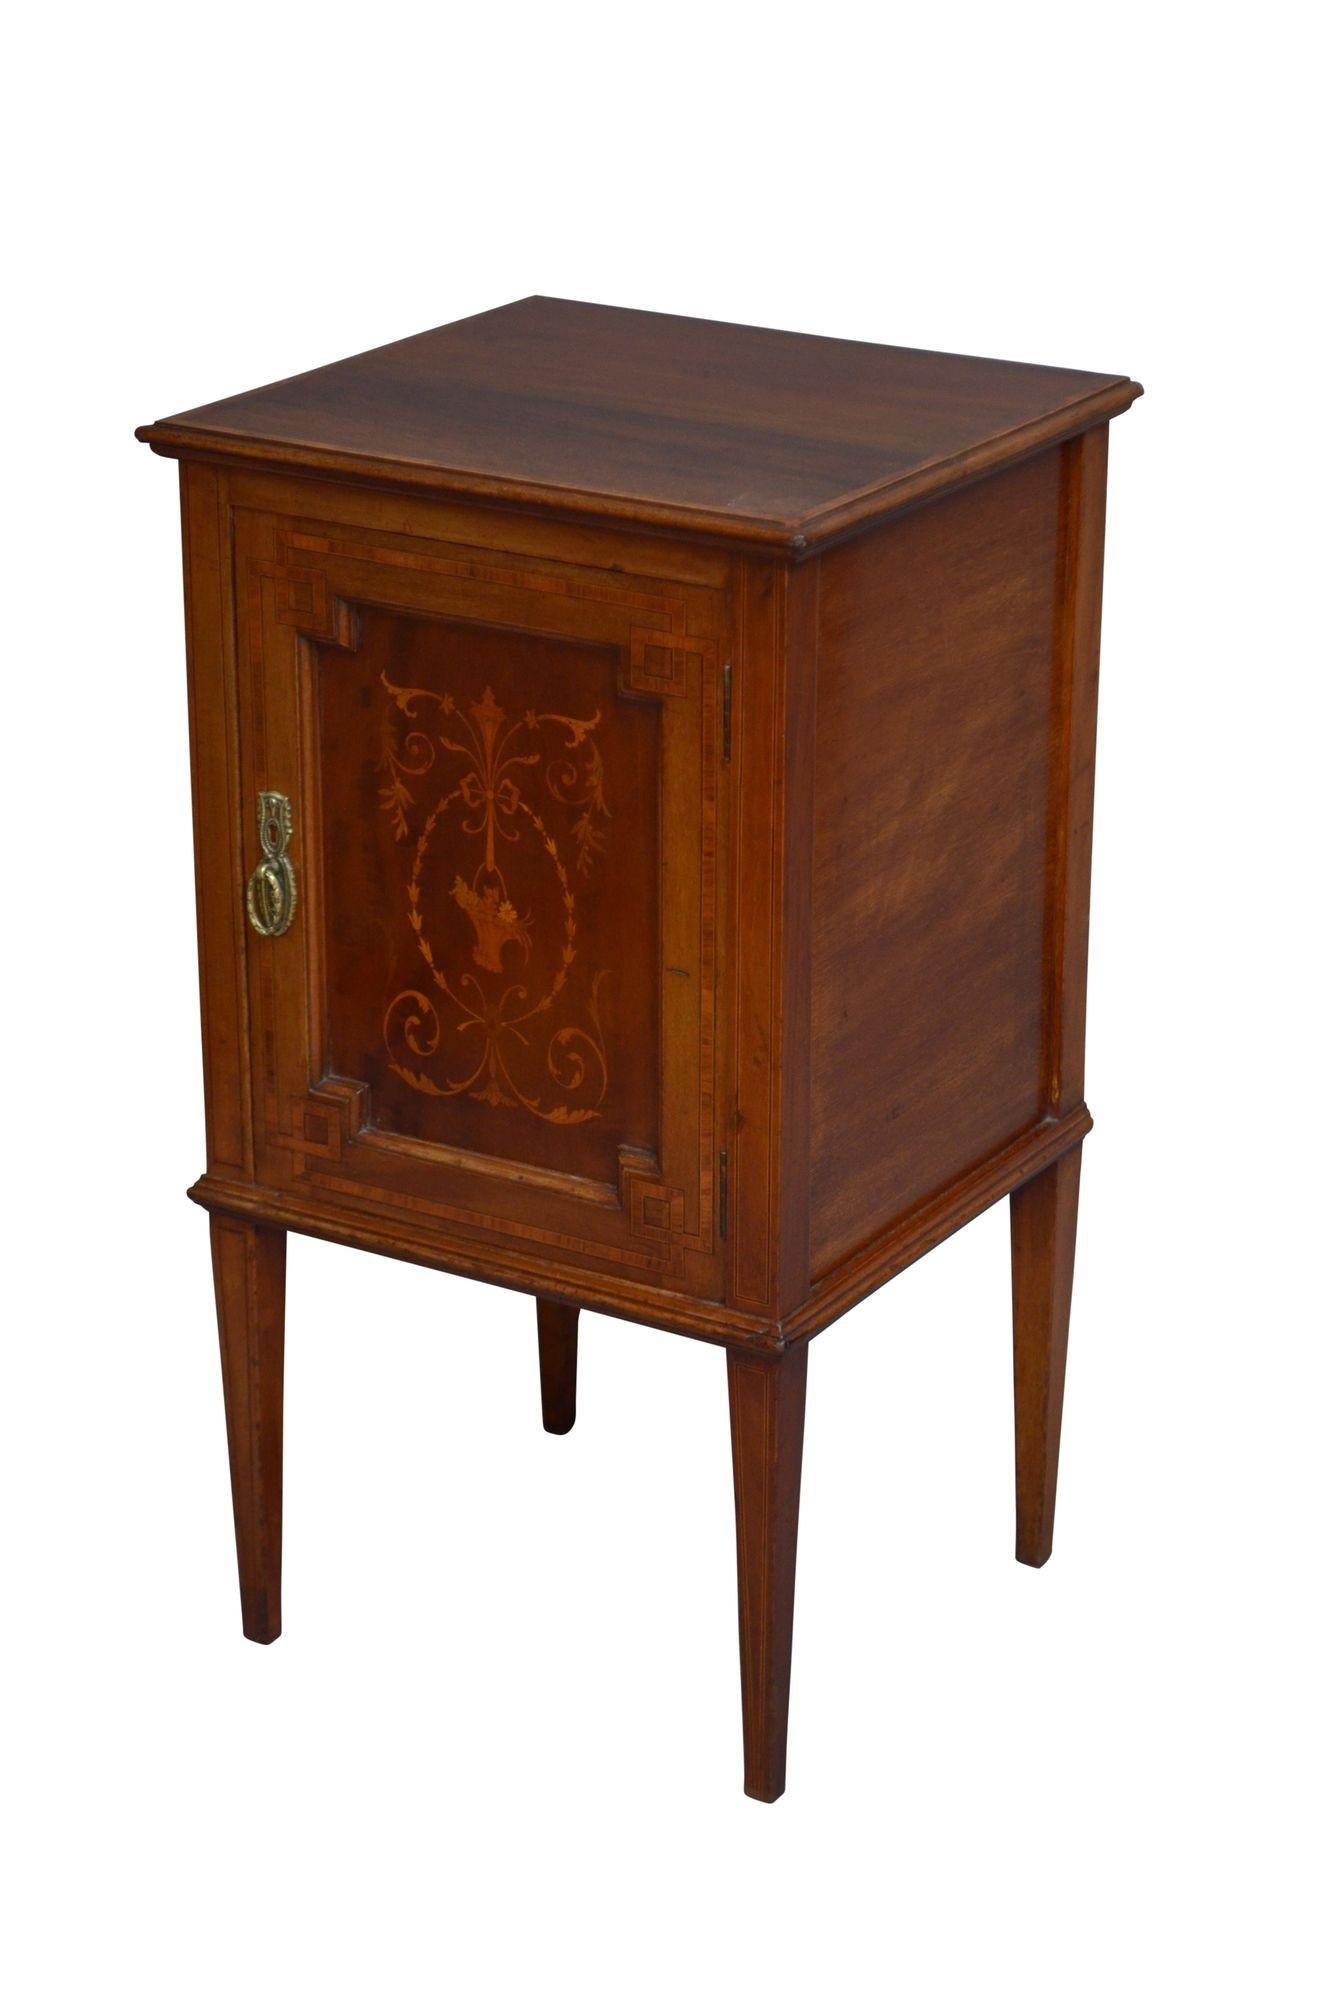 K0302 Attractive Edwardian bedside cupboard in mahogany, having figured mahogany and inlaid top with moulded edge above satinwood crossbanded and inlaid panelled door fitted with original brass handles, all standing on inlaid tapered legs. This